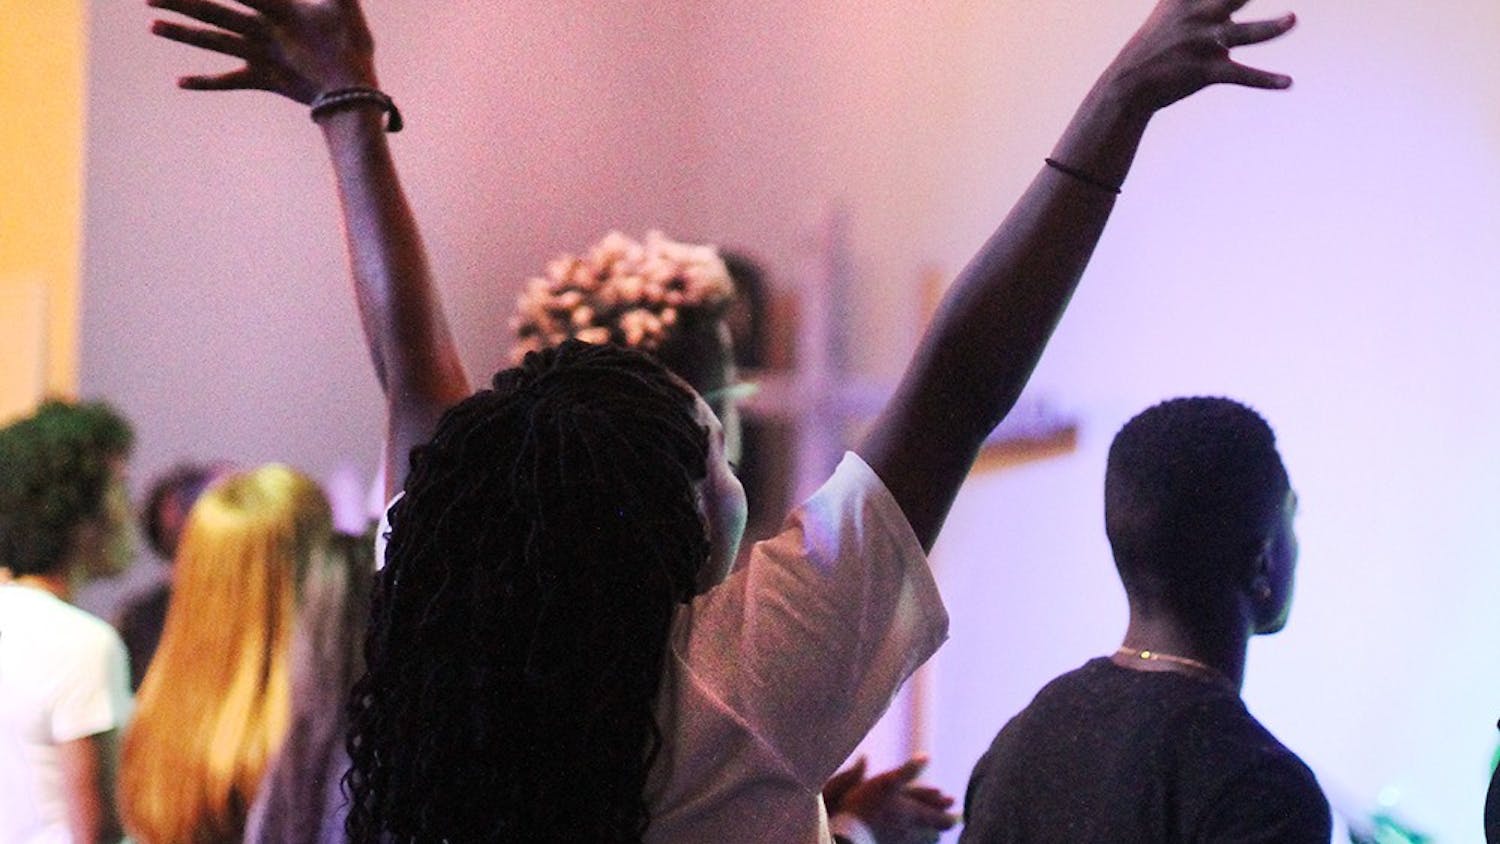 Senior Kennedy Coopwood raises her hands in praise during worship at City Church in Bloomington.